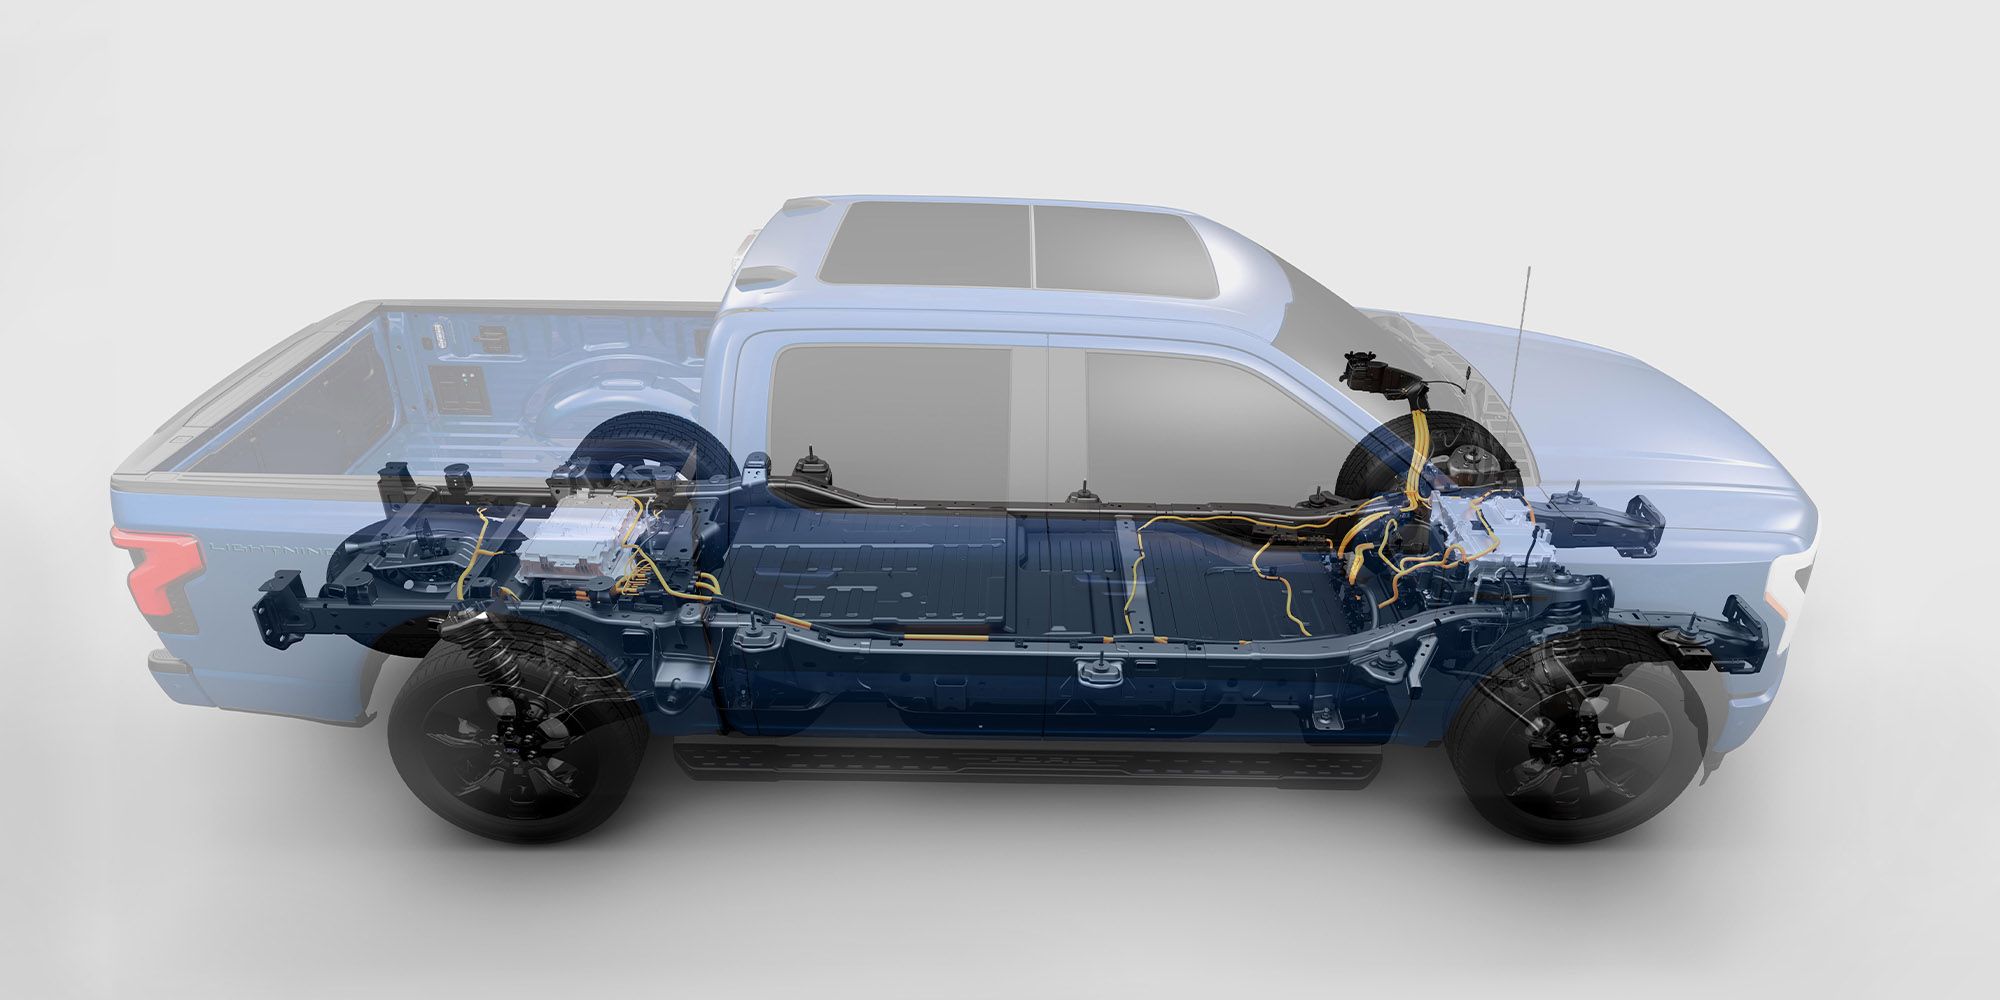 Under the skin of the F-150 Lightning